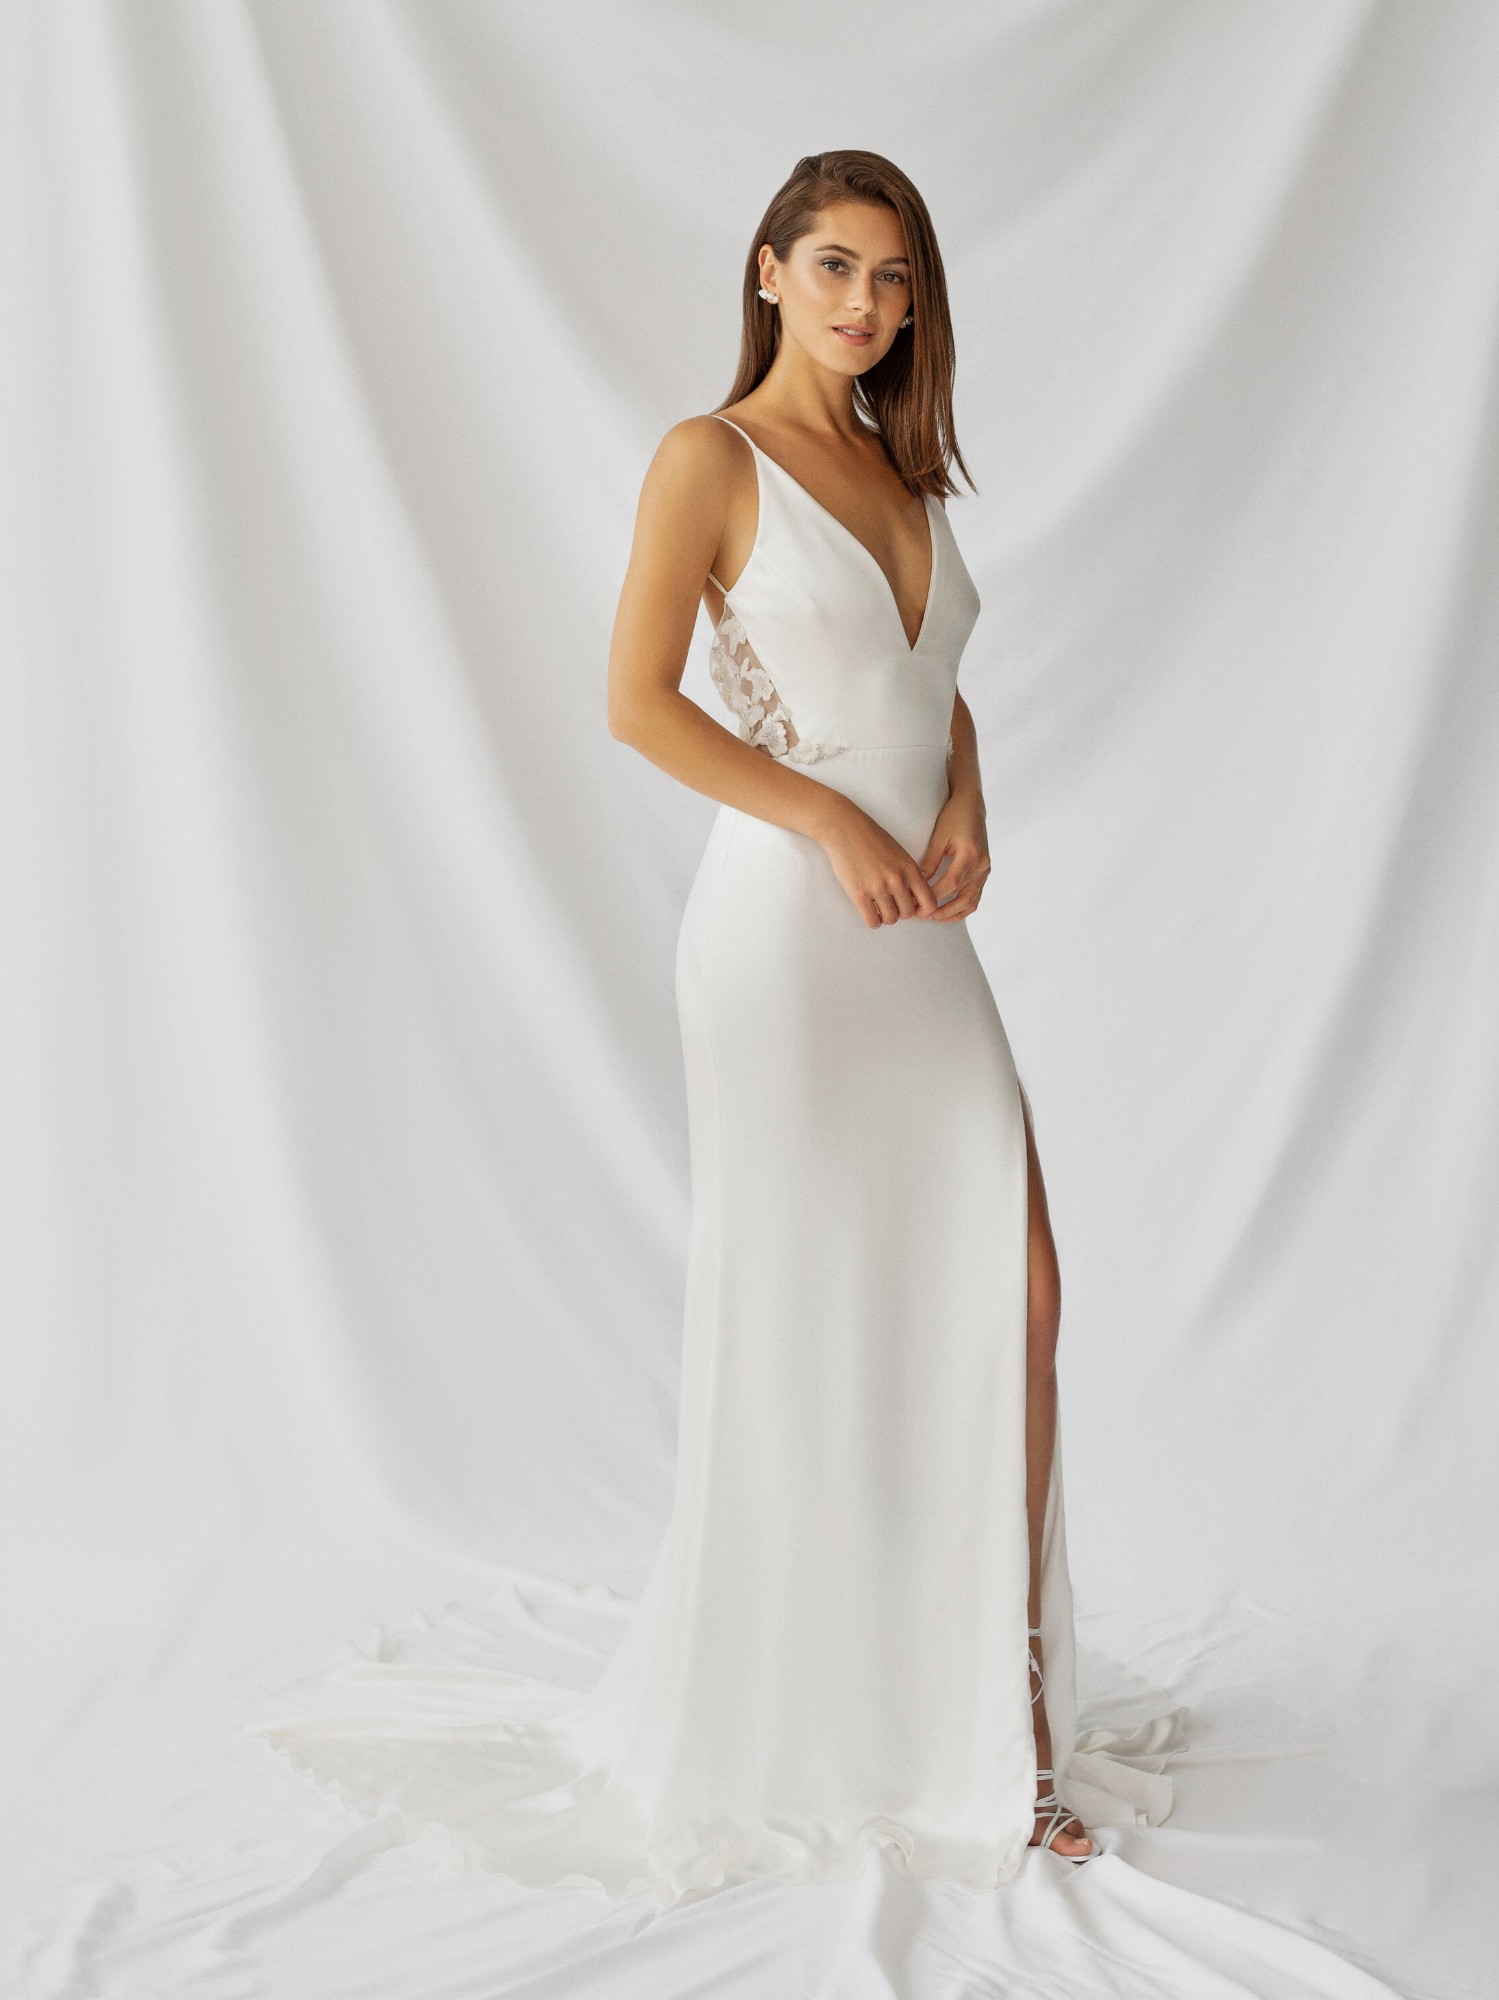 Nerine Gown Inspirated By Botanica of Alexandra Grecco 2021 Bridal Collection